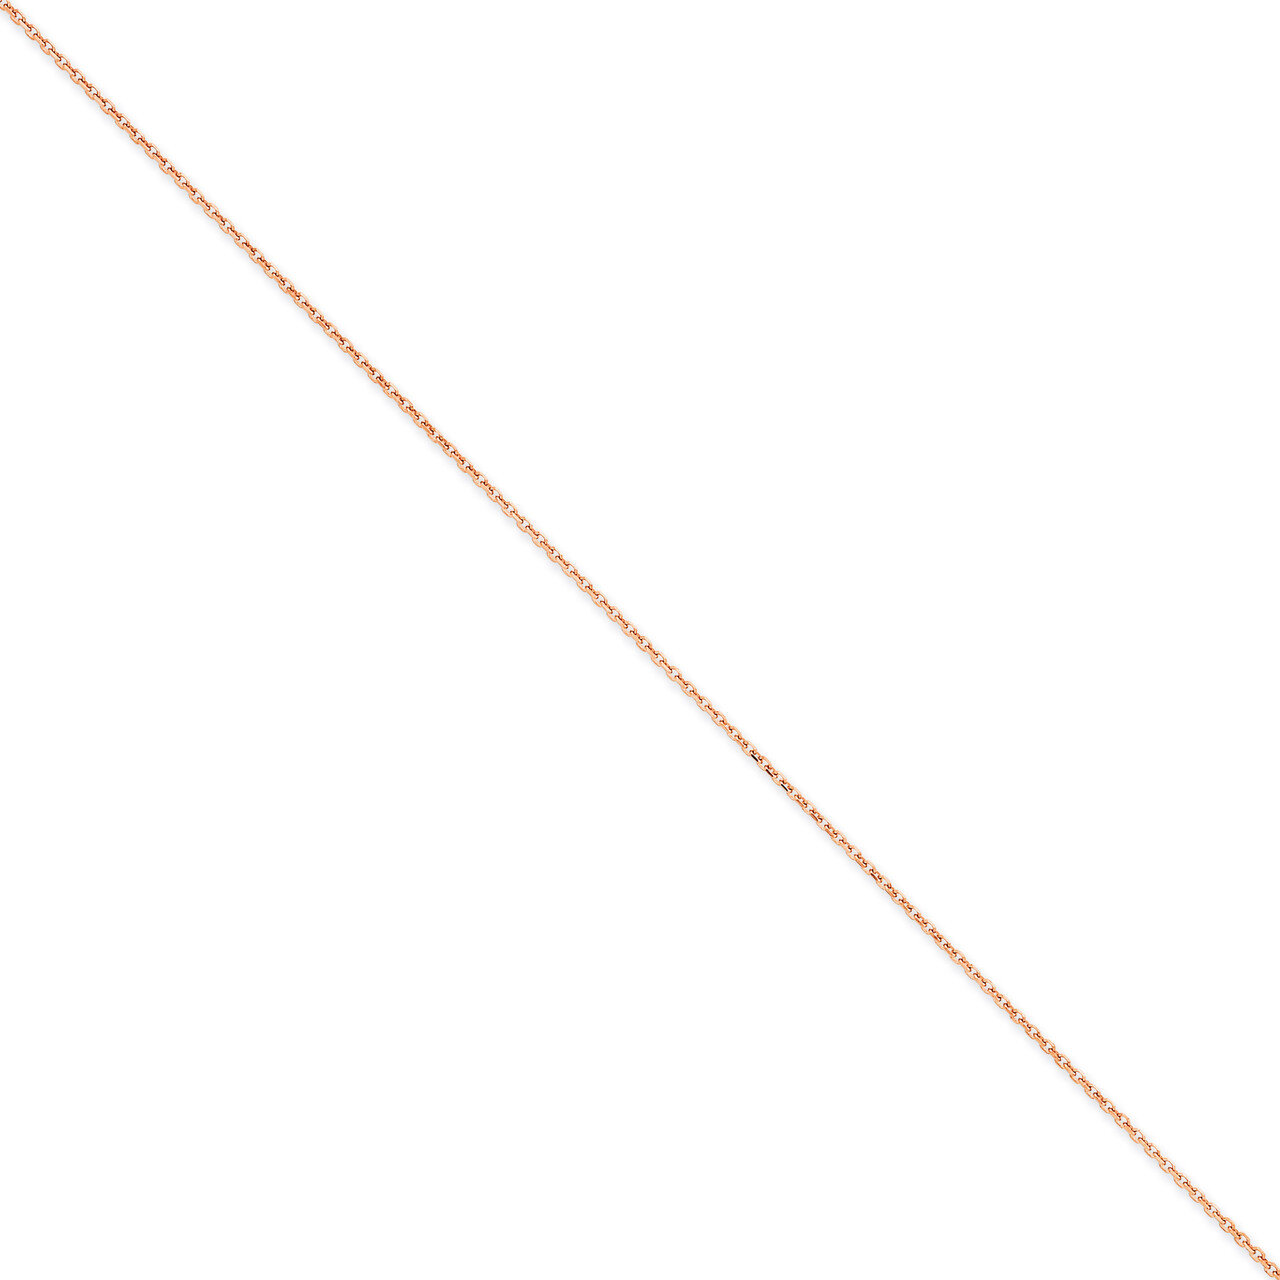 1.4mm Diamond-cut Cable Chain 18 Inch 14k Rose Gold RSC21-18